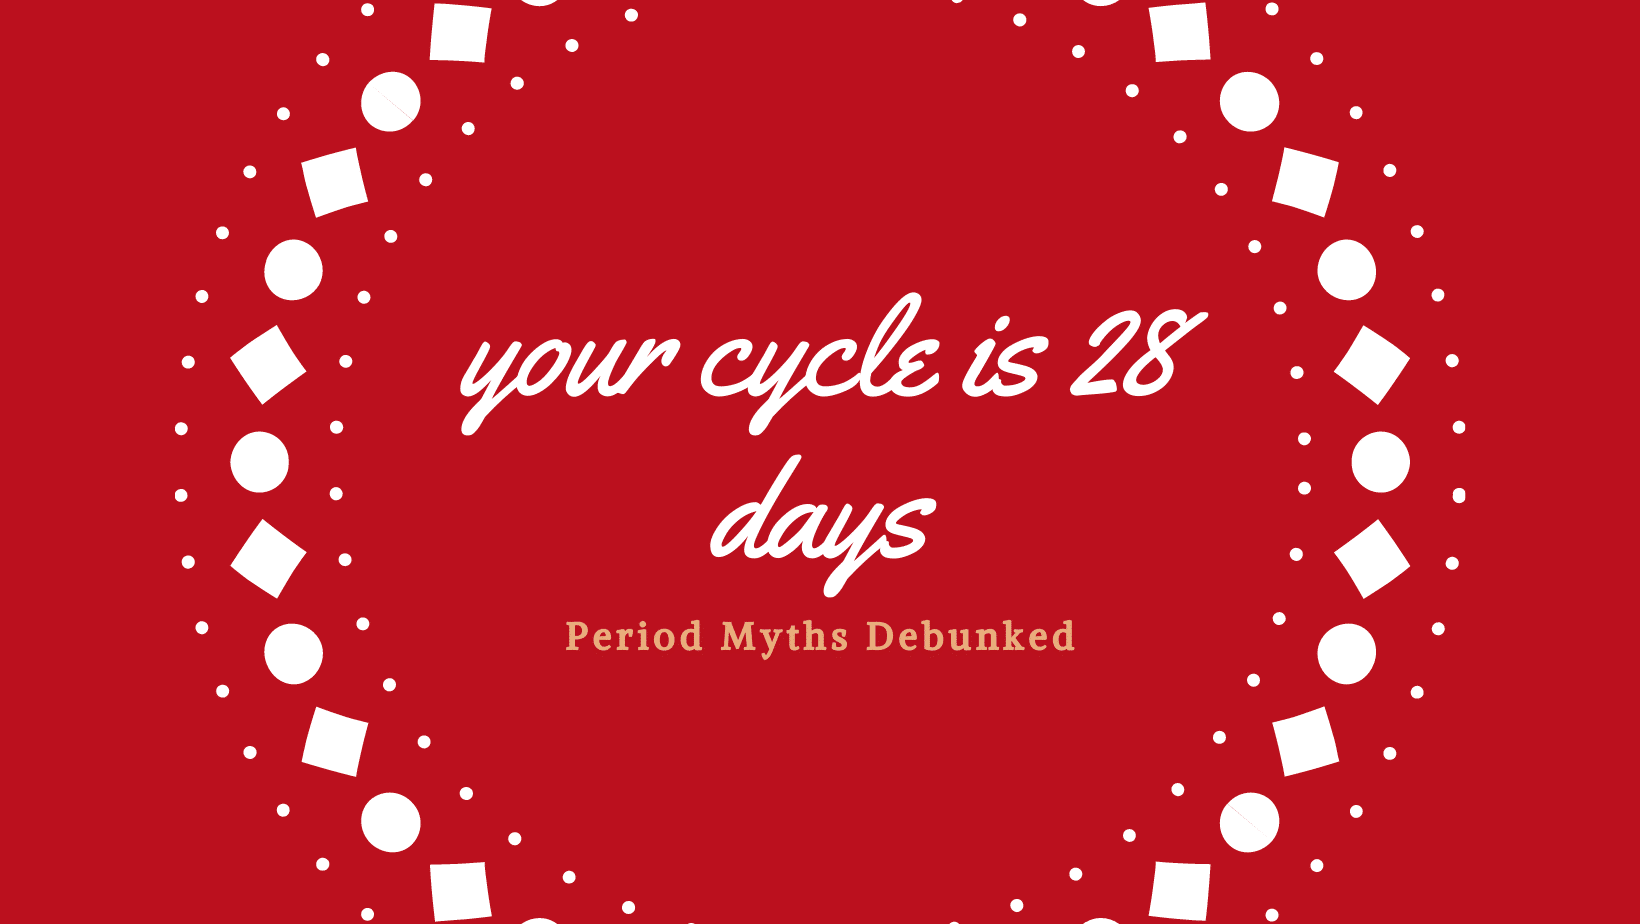 Graphic about debunking period myths that your cycle is 28 days.